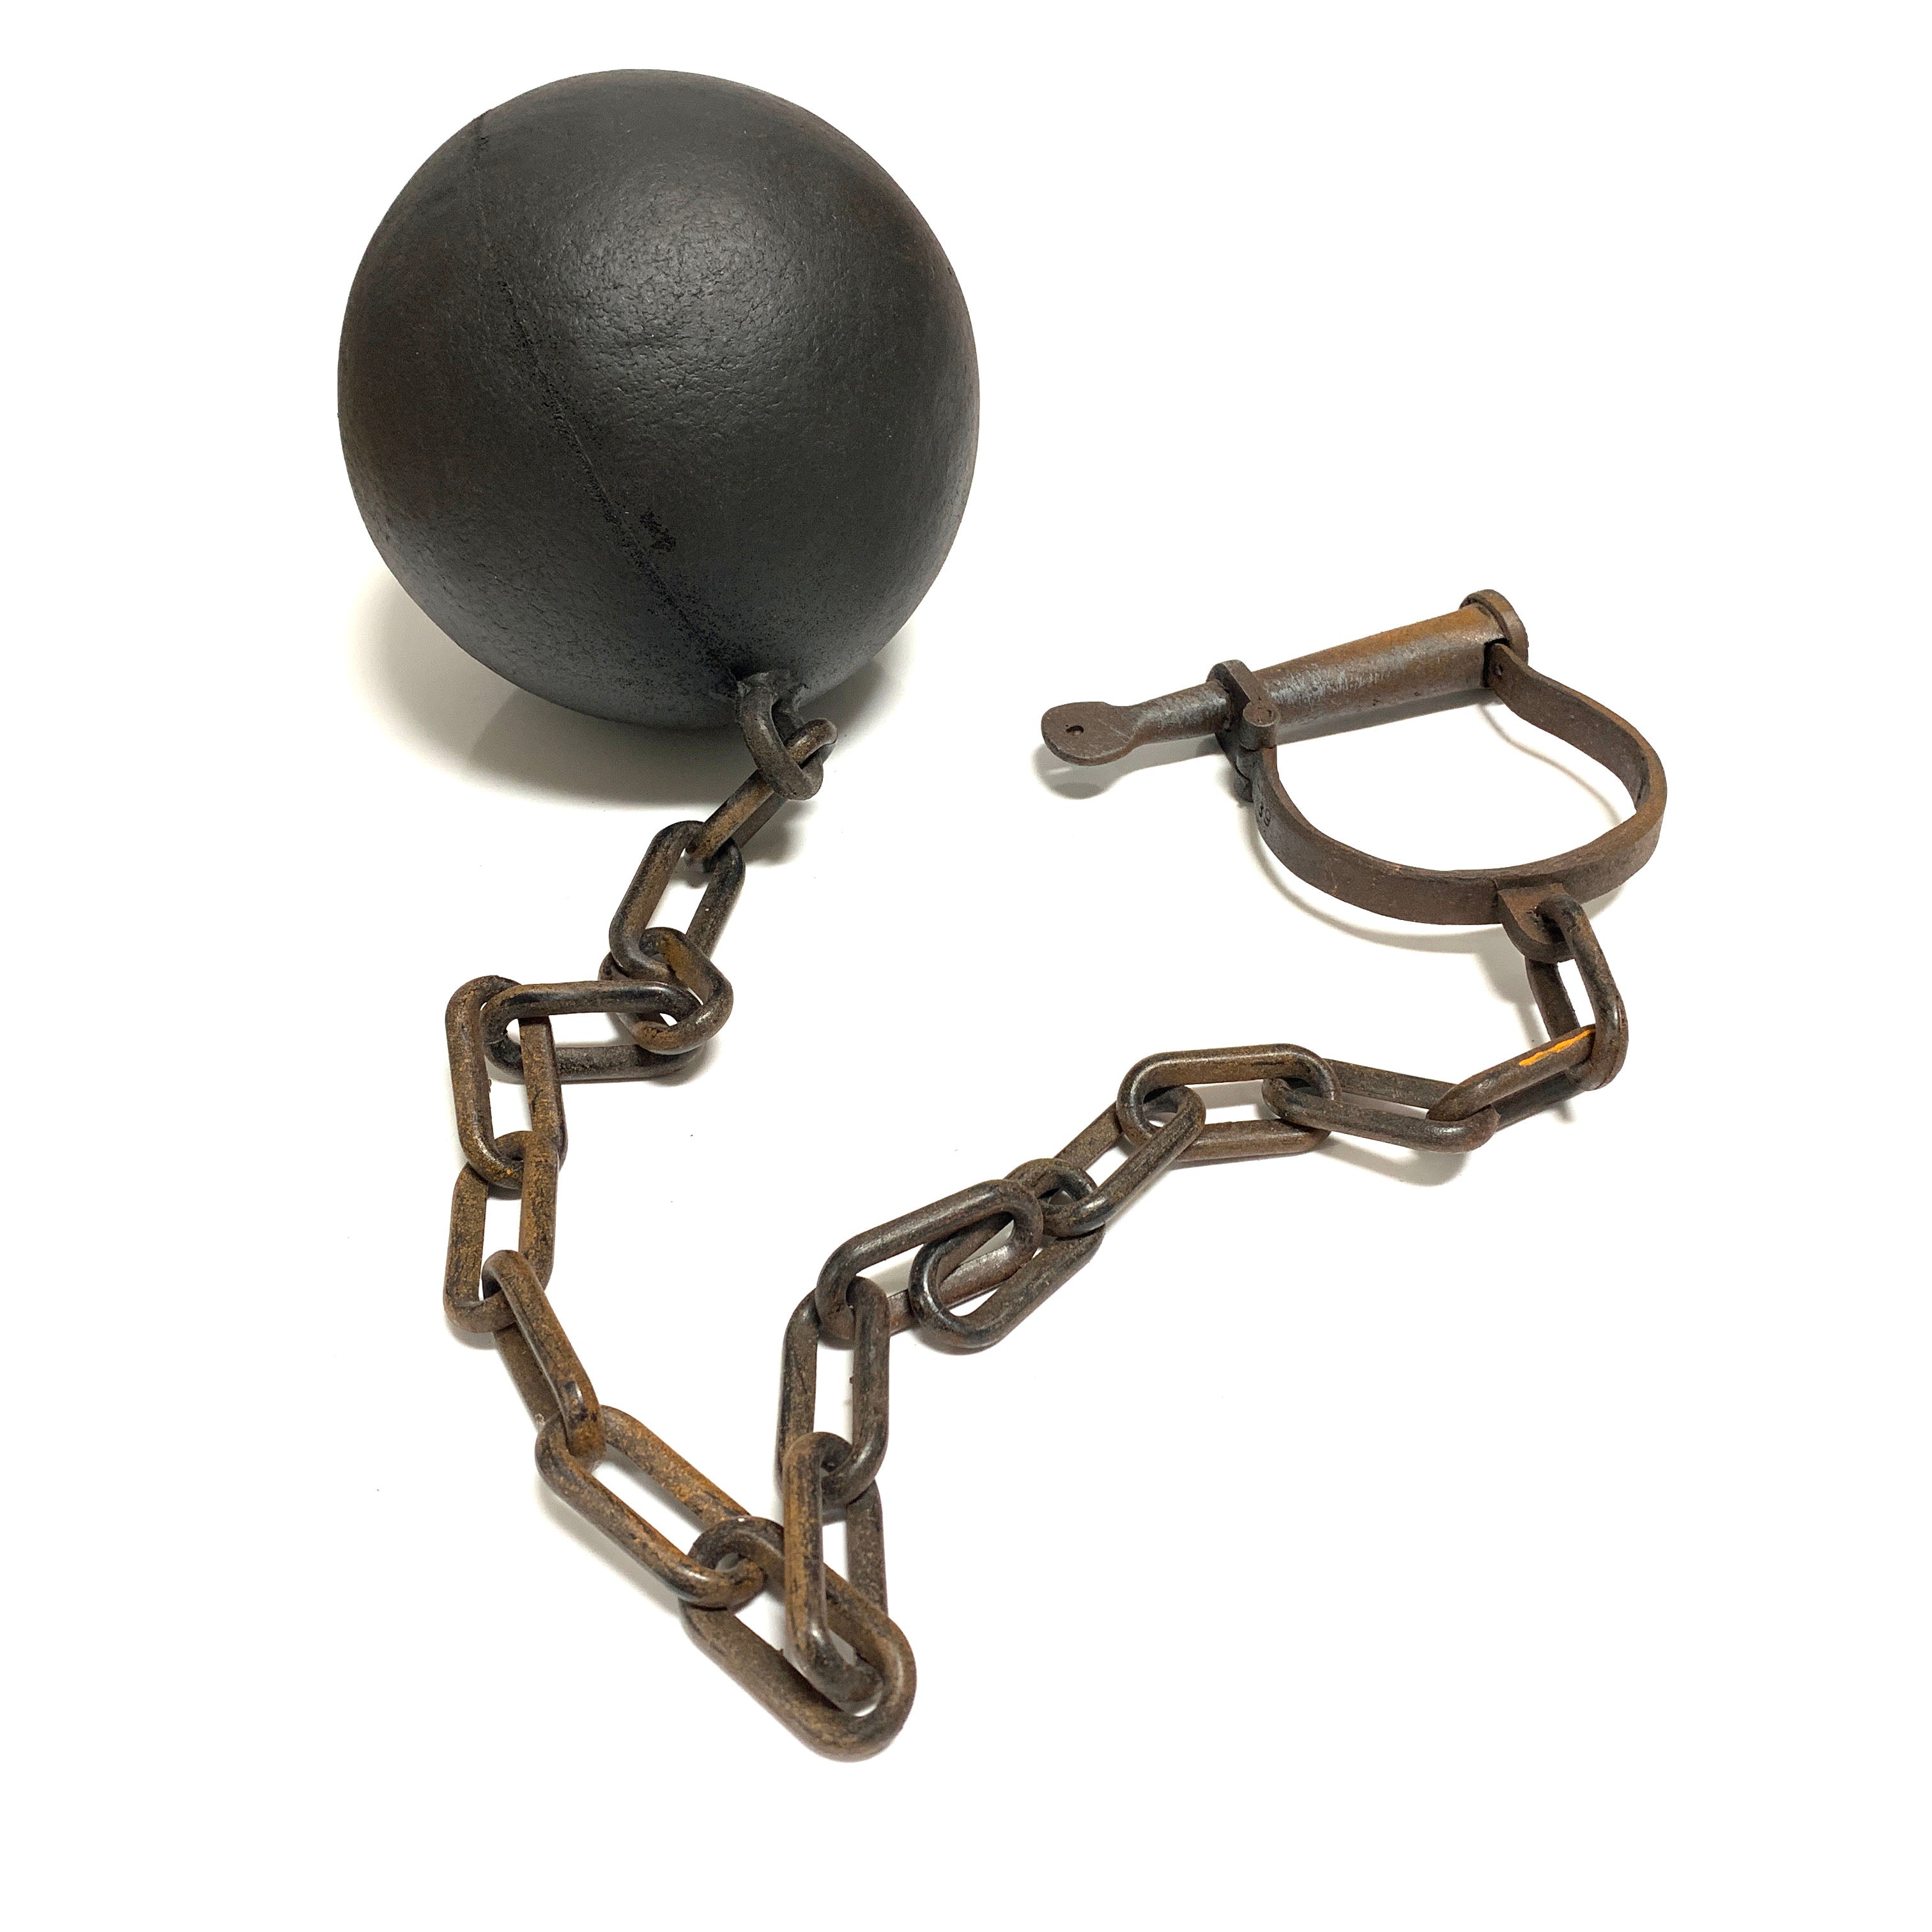 Foam Rubber Ball with Plastic Chain & Prop Leg Iron - Action Prop